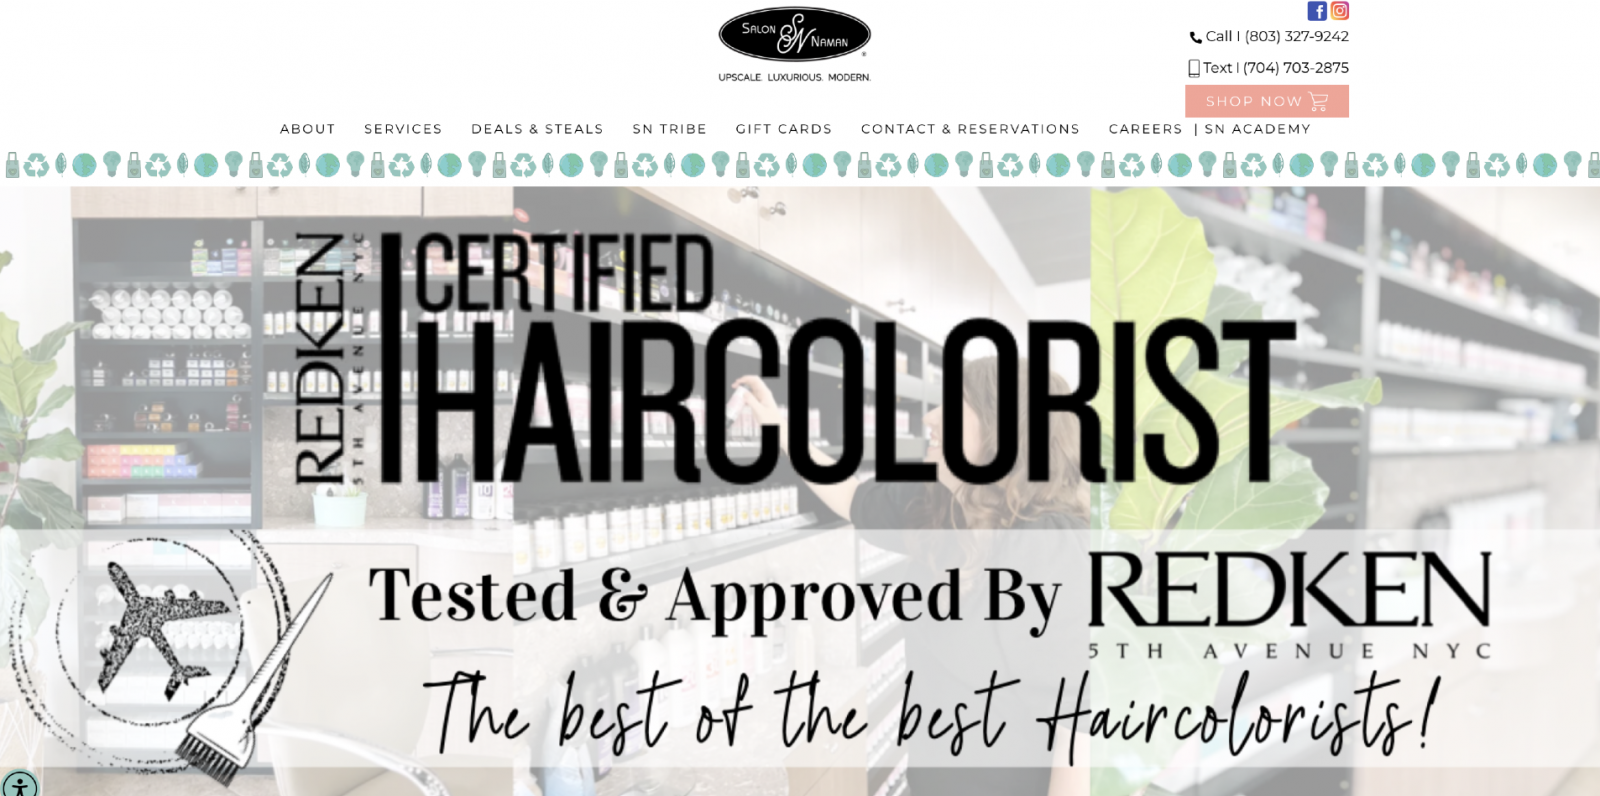 redken-certified-haircolorists-new